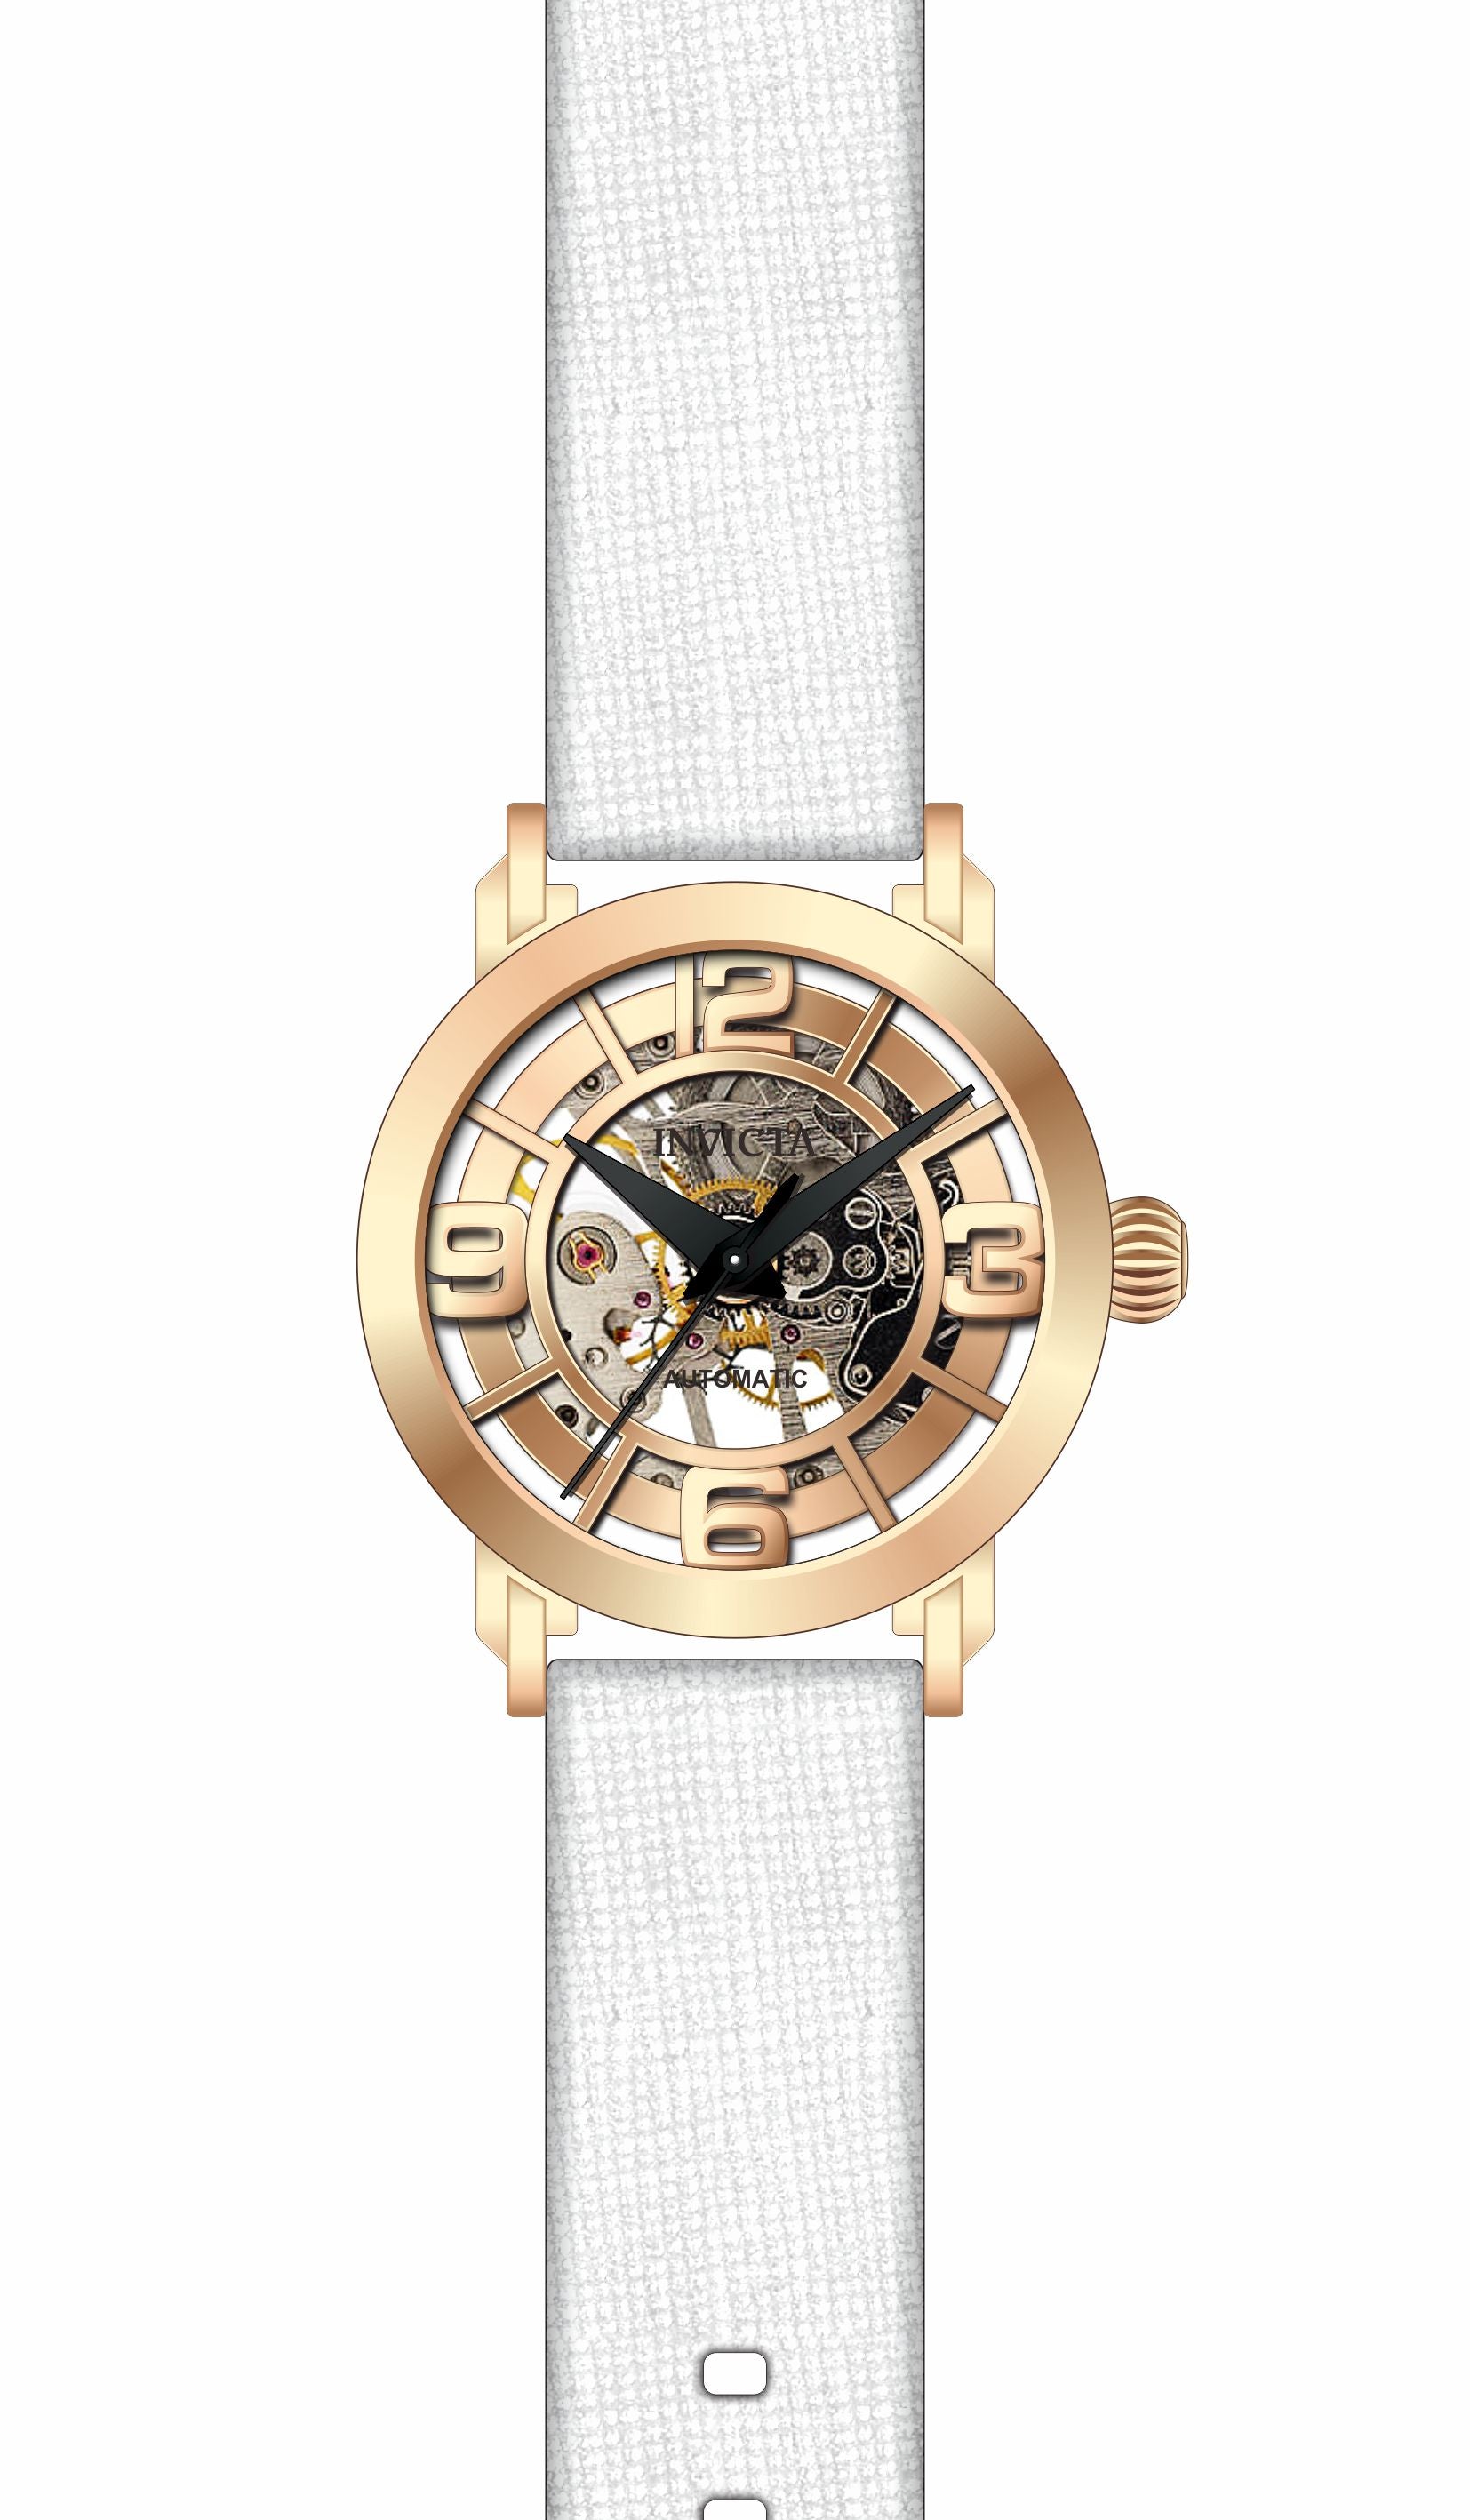 Band for Invicta Objet D Art Lady 32293